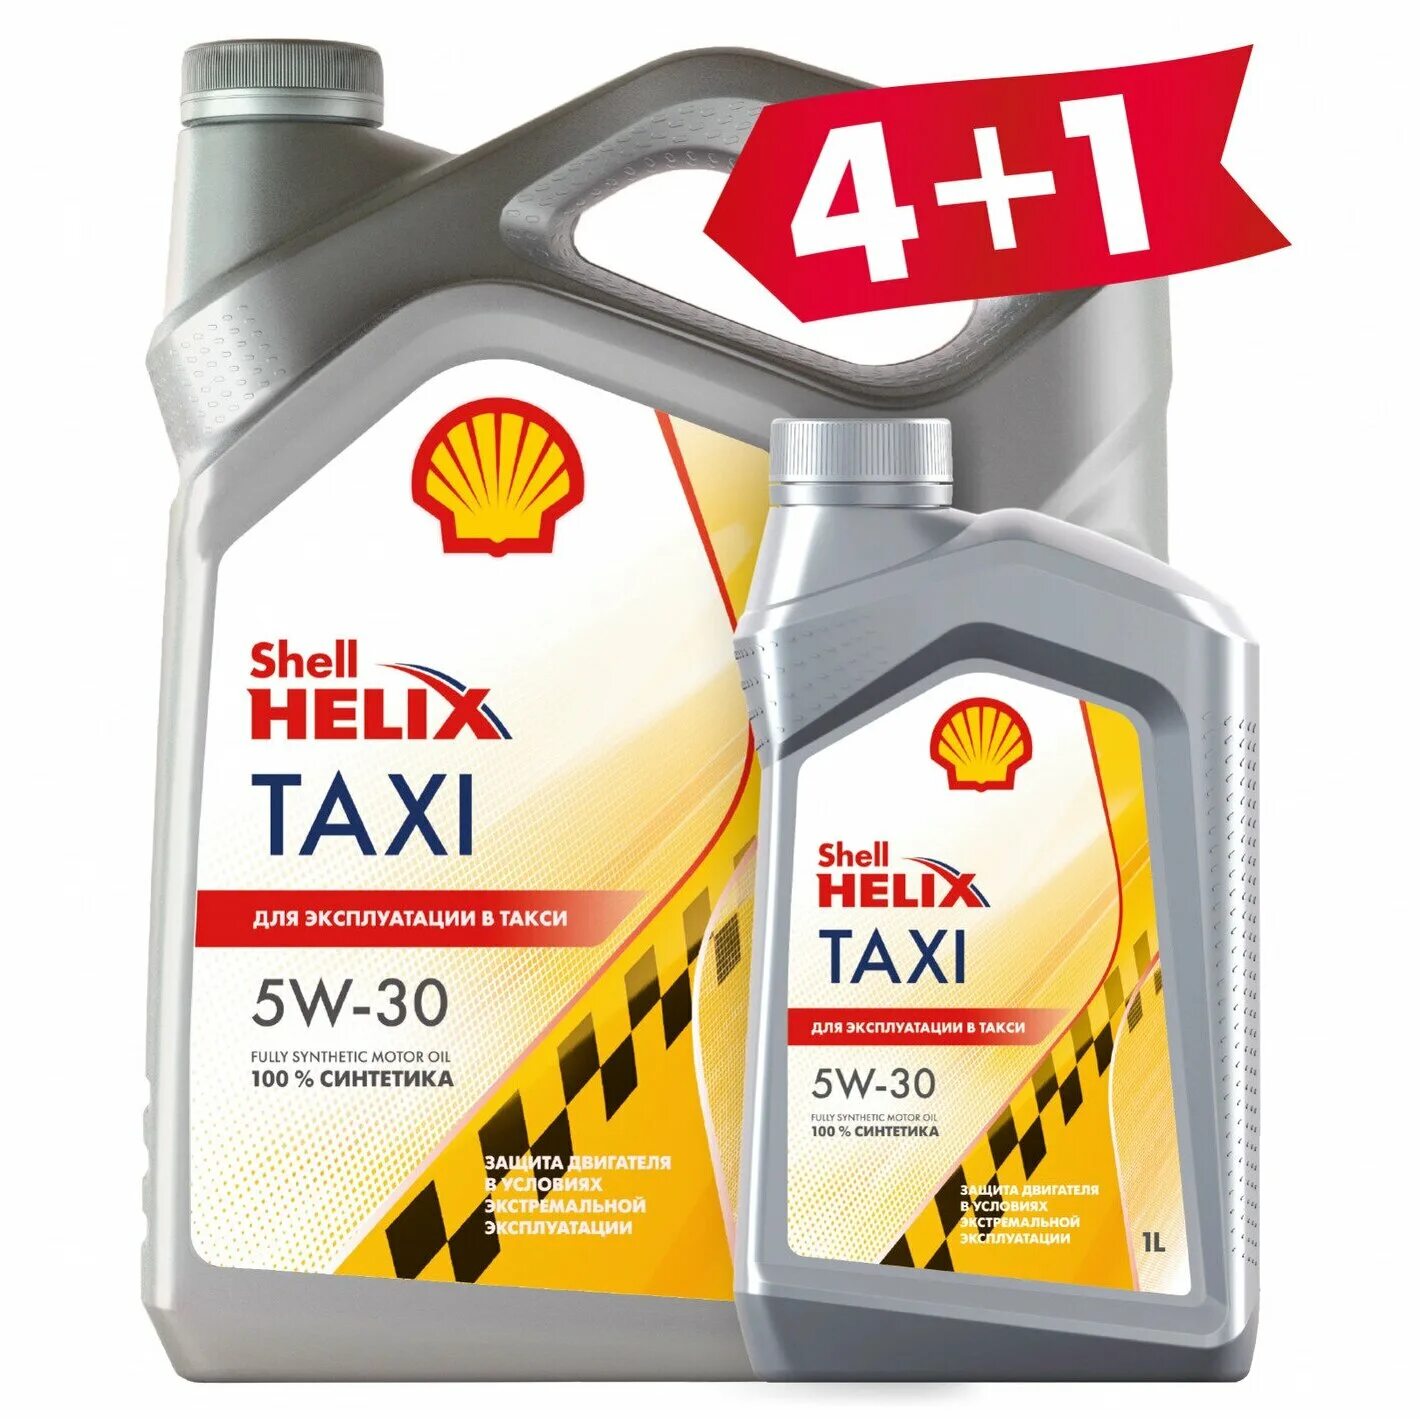 Моторное масло шелл 5. Shell Helix Taxi 5w-40 1л. Масло Шелл такси 5w30. Масло Шелл такси 5w40. Shell Taxi 5w-30.